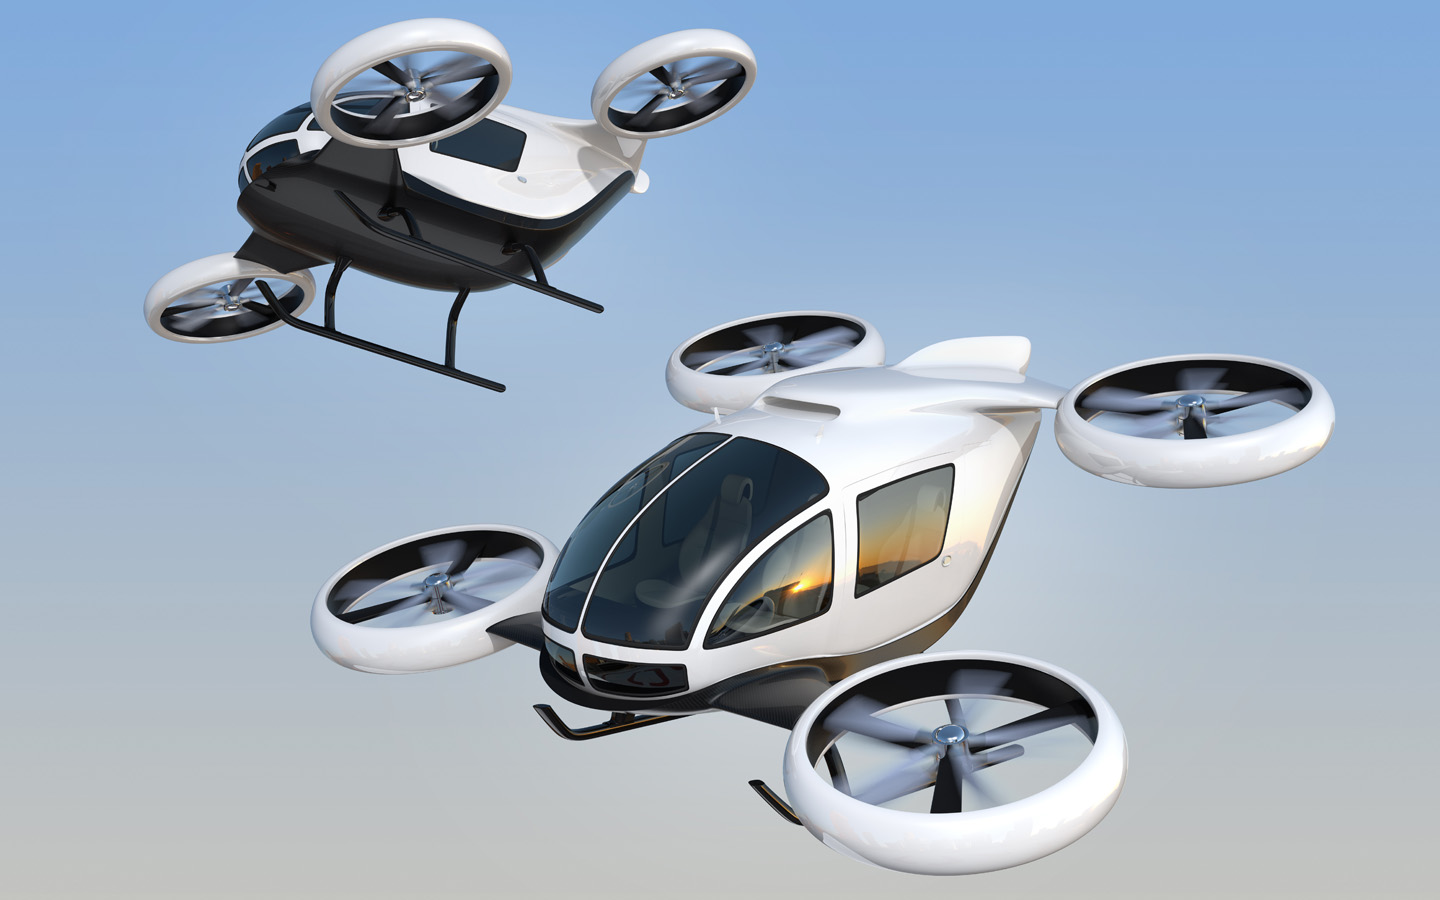 two passenger drones in air